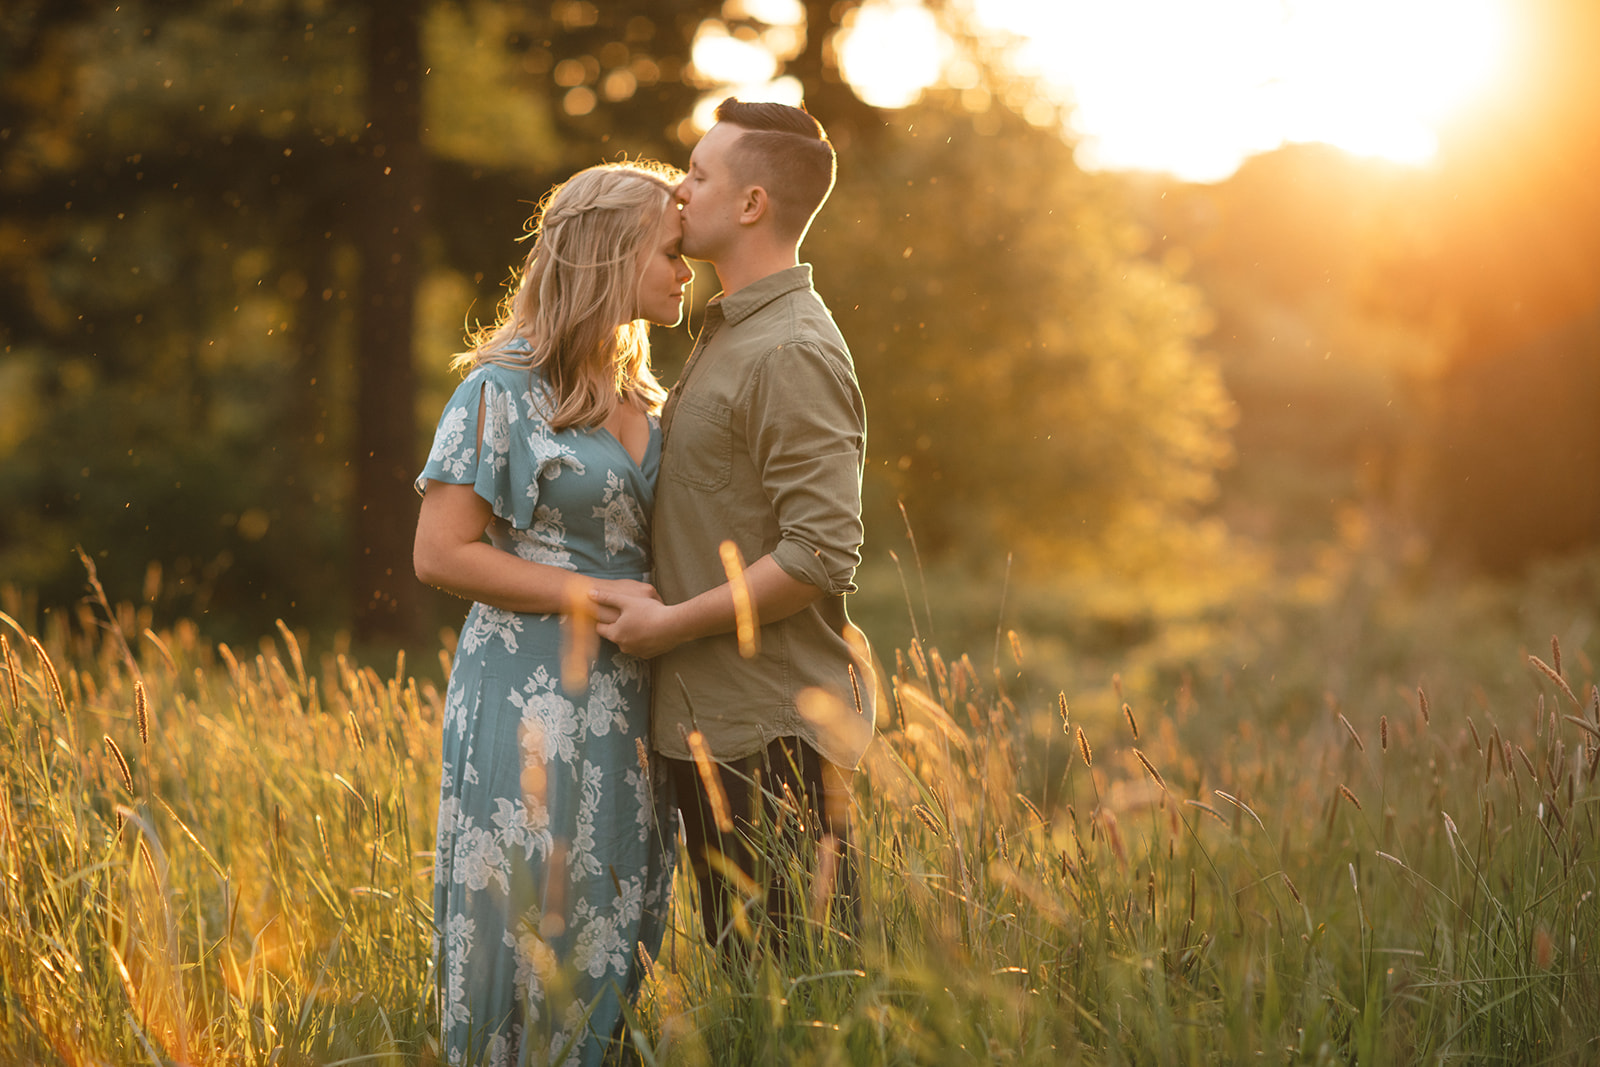 Engagement session in Discovery Park in Seattle with couple standing in a grassy field at sunset.